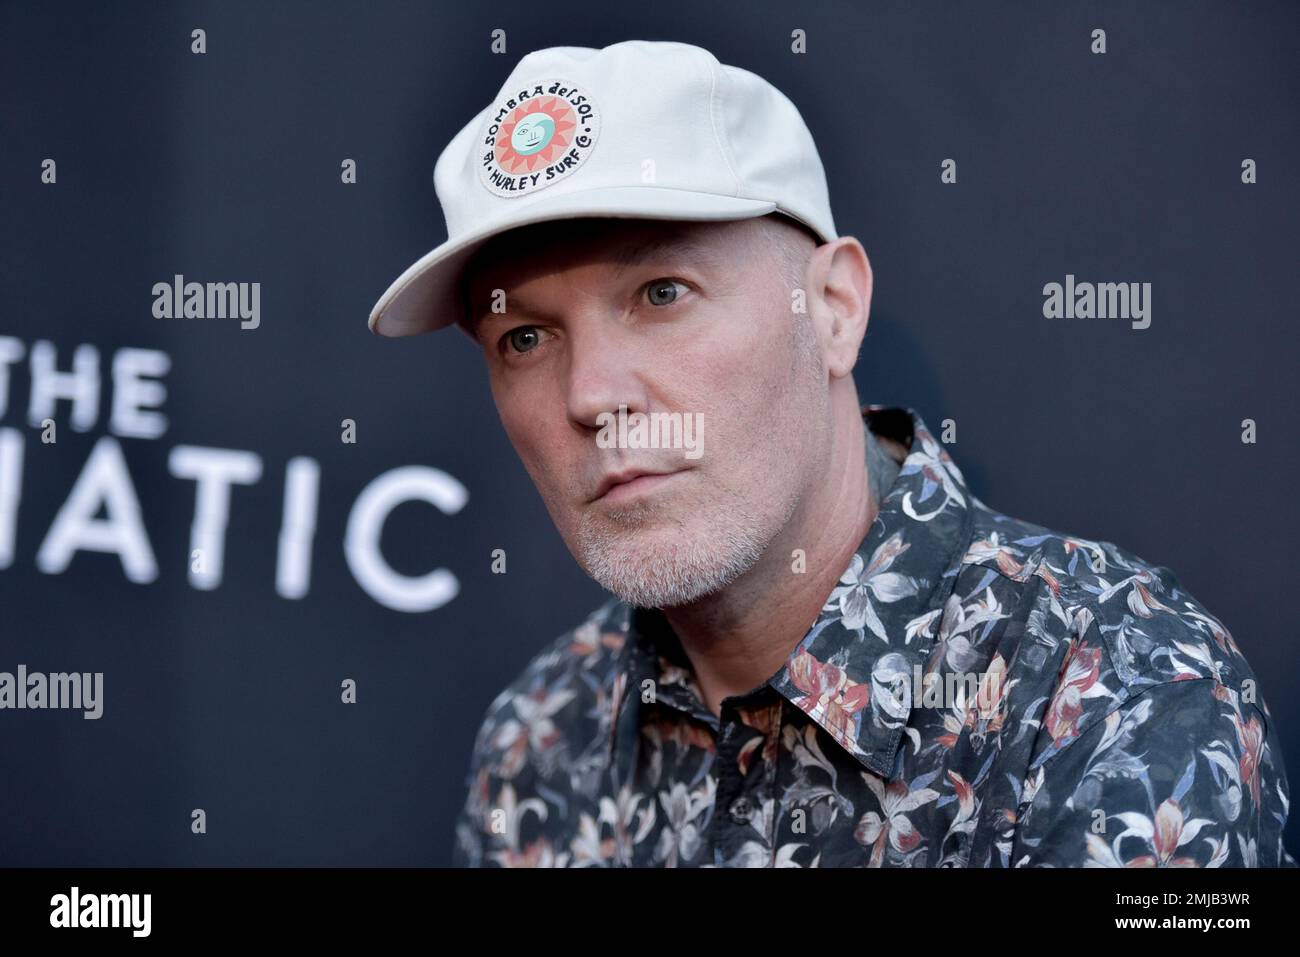 Fred Durst attends the LA premiere of "The Fanatic" at the Egyptian Theatre on Thursday, Aug. 22, 2019, in Los Angeles. (Photo by Richard Shotwell/Invision/AP) Foto Stock